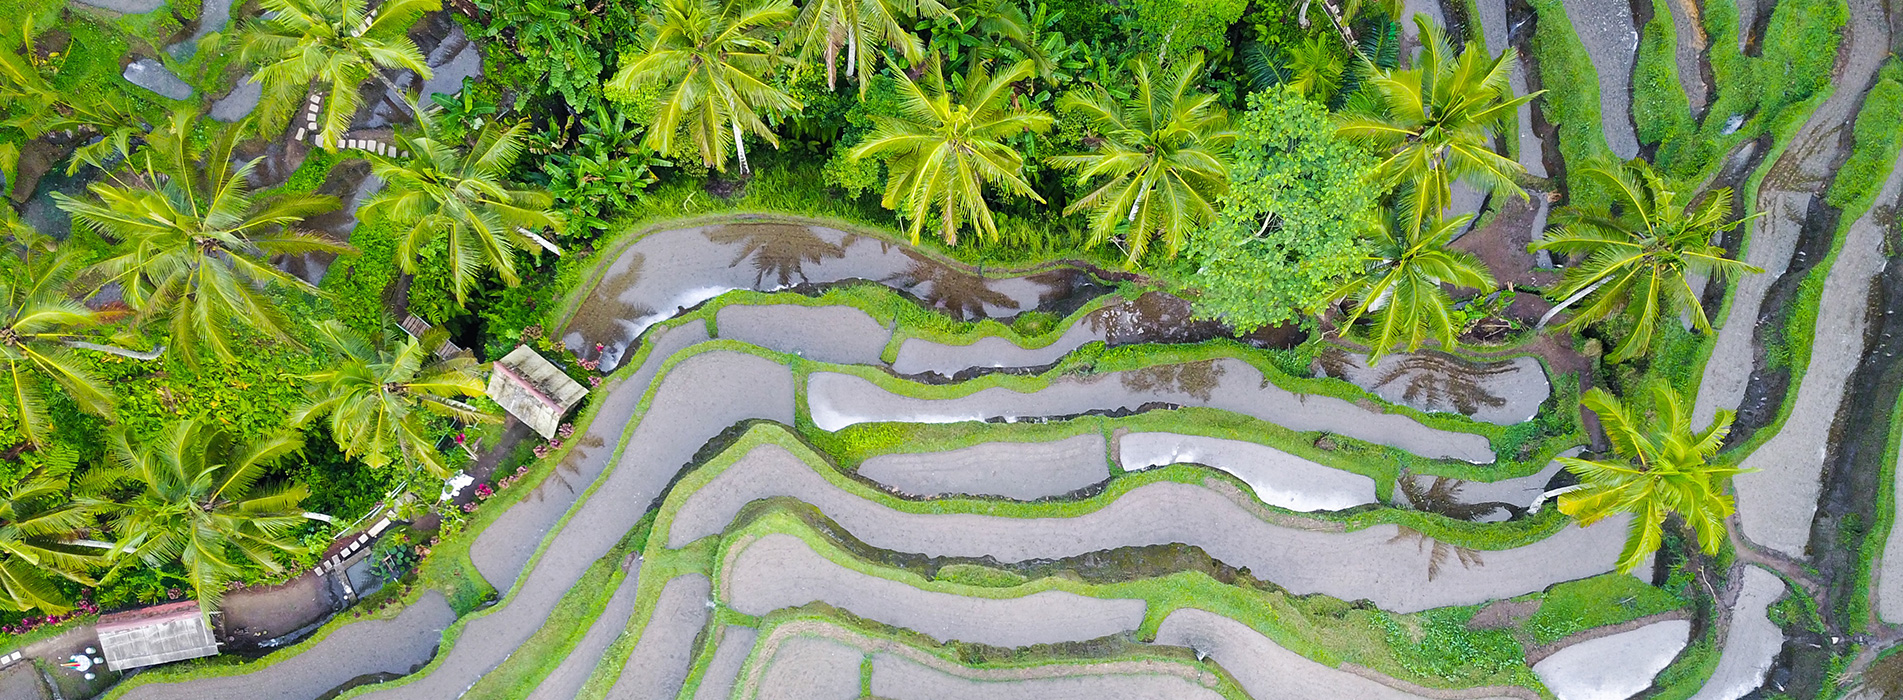 An aerial view of a rice paddy field